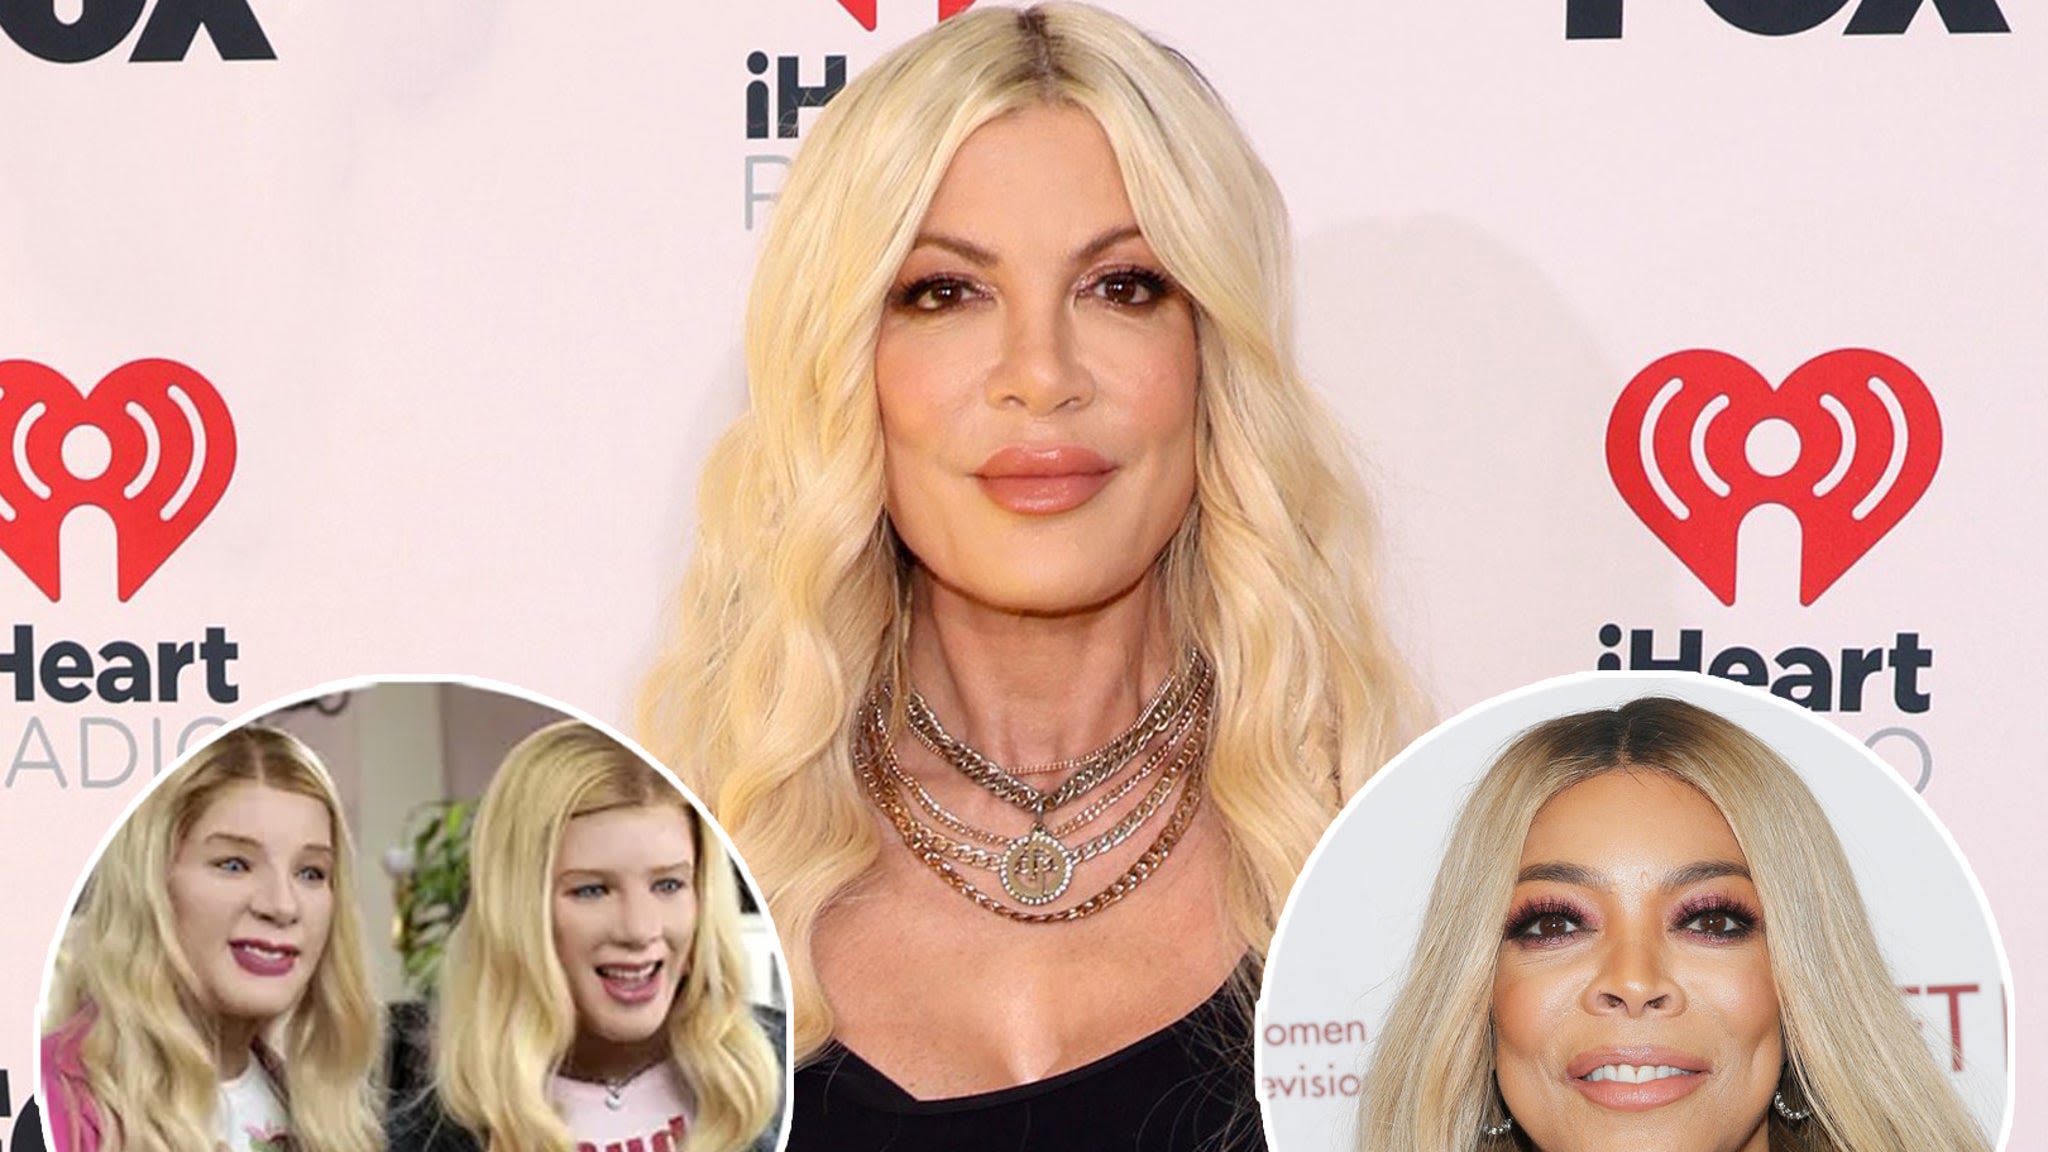 Tori Spelling Responds to 'White Wendy Williams' & 'White Chicks' Comparisons from Fans